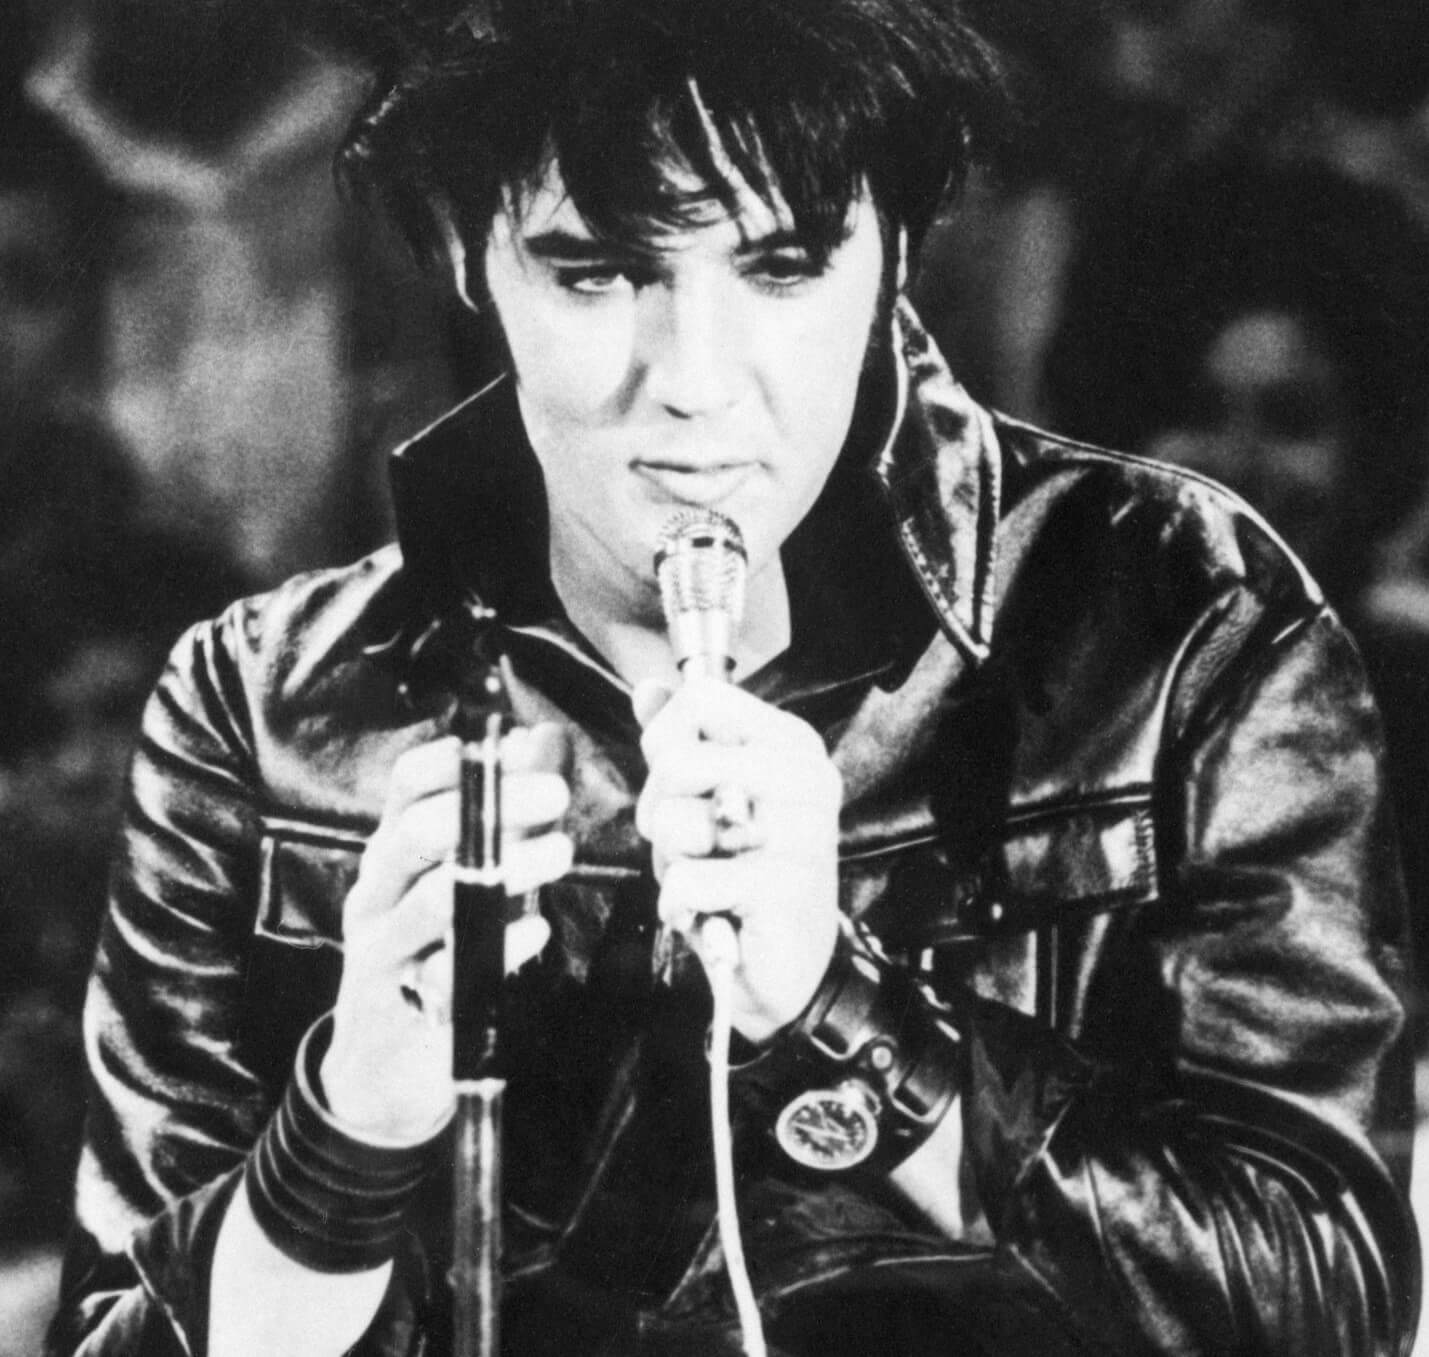 "Until It's Time for You to Go" singer Elvis Presley wearing leather